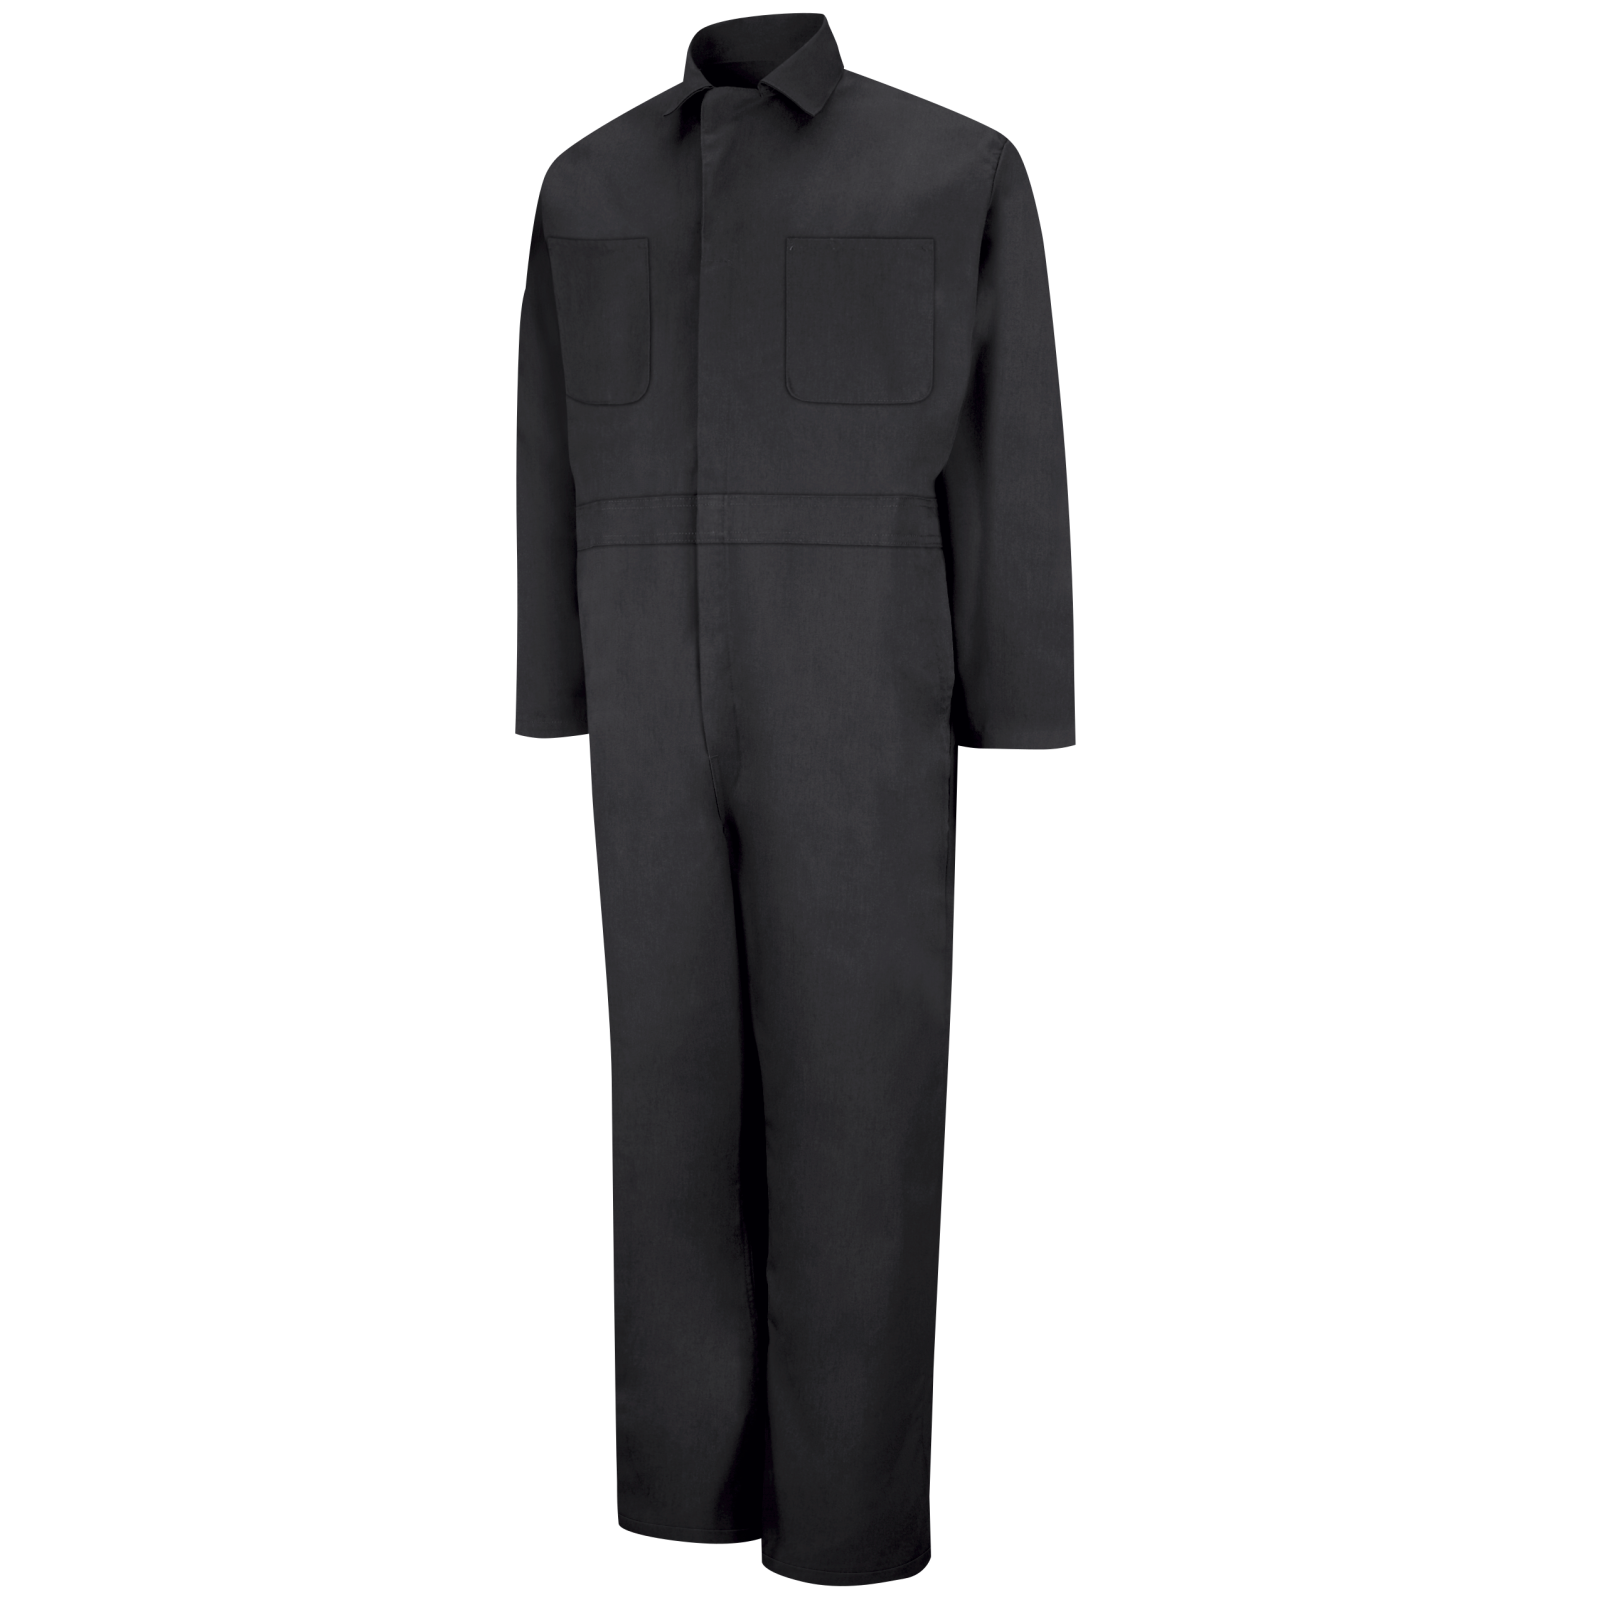 Red Kap Men's Long Sleeve Twill Action Back Coverall 